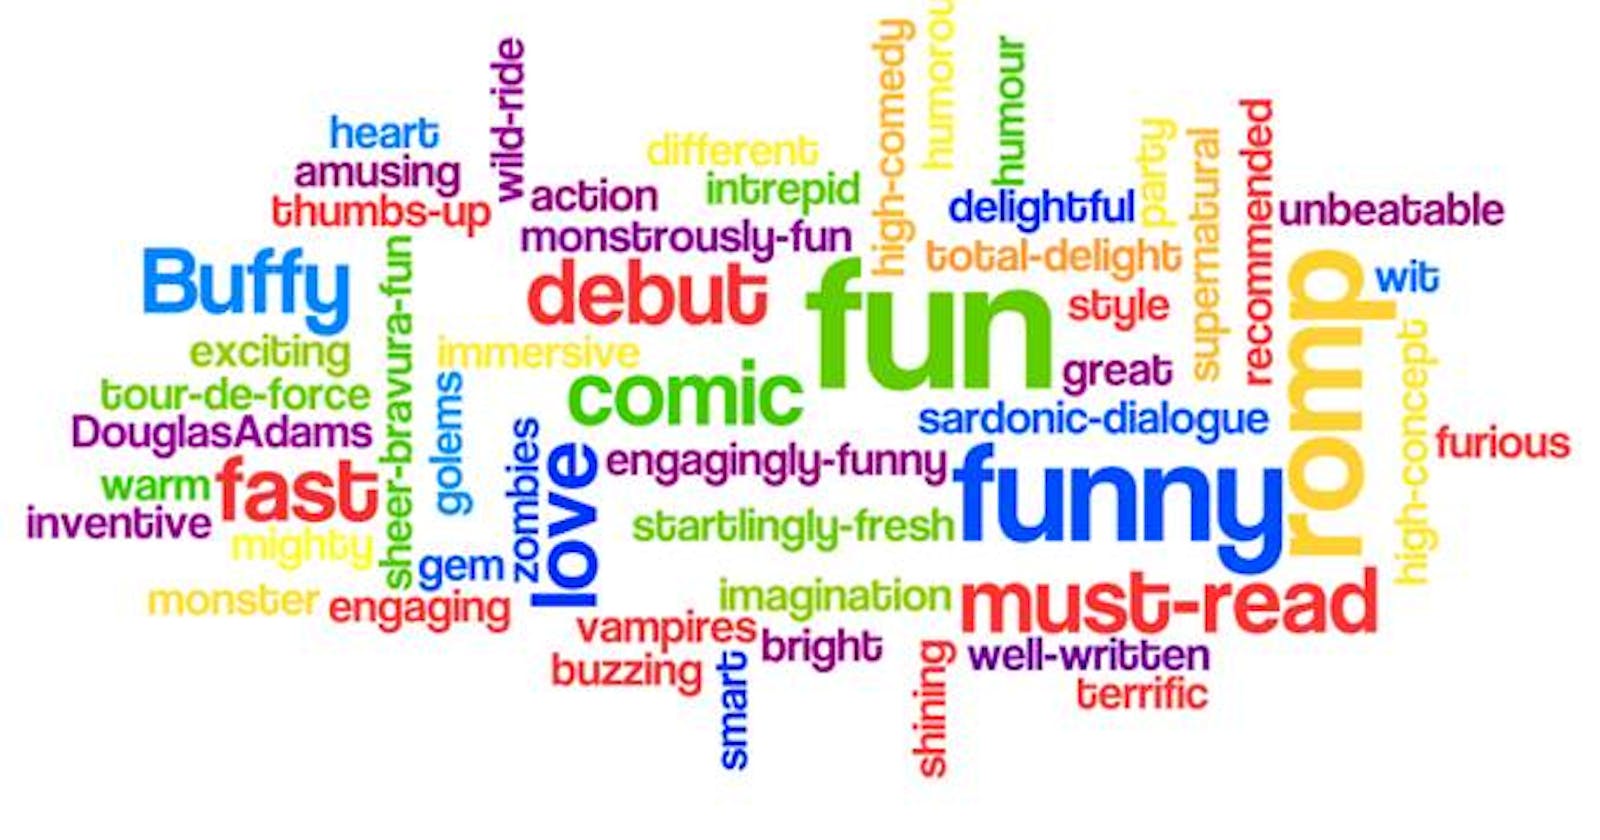 Exploring Word Cloud Maker Shapes: Adding Creativity to Your Visualizations